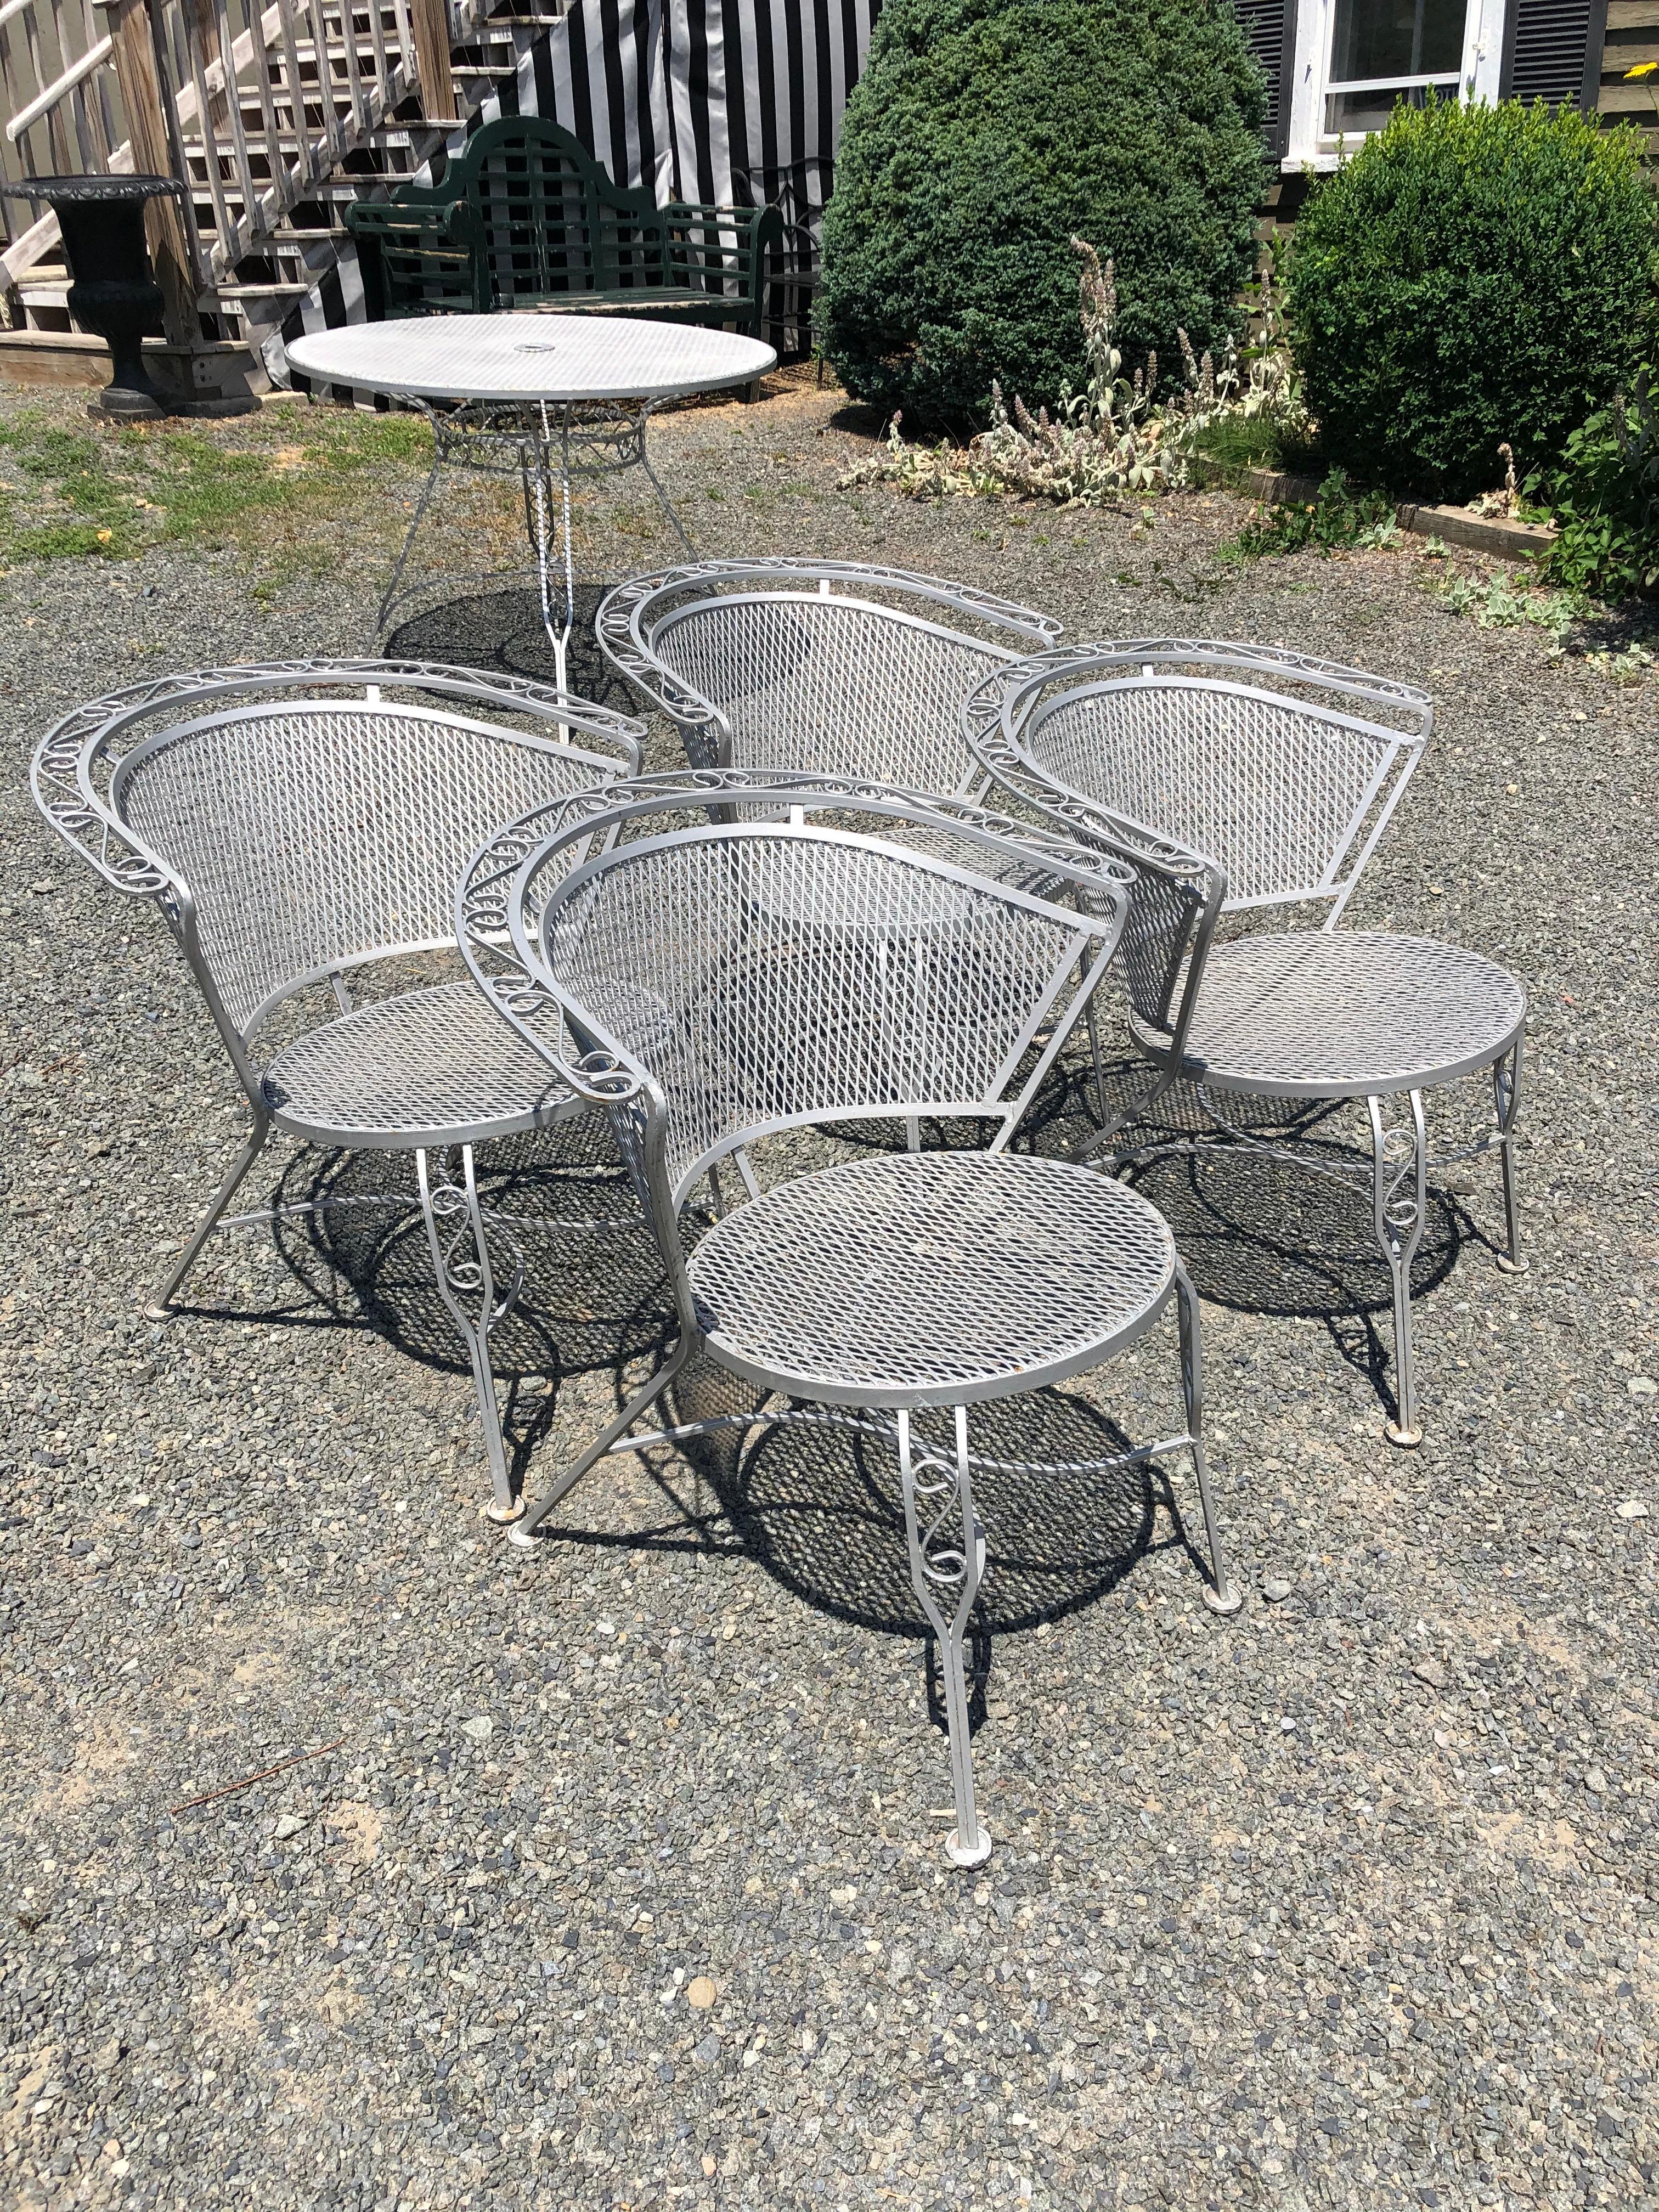 Mid-20th Century Vintage Woodard Midcentury Outdoor Dining Set with Round Table and 4 Chairs